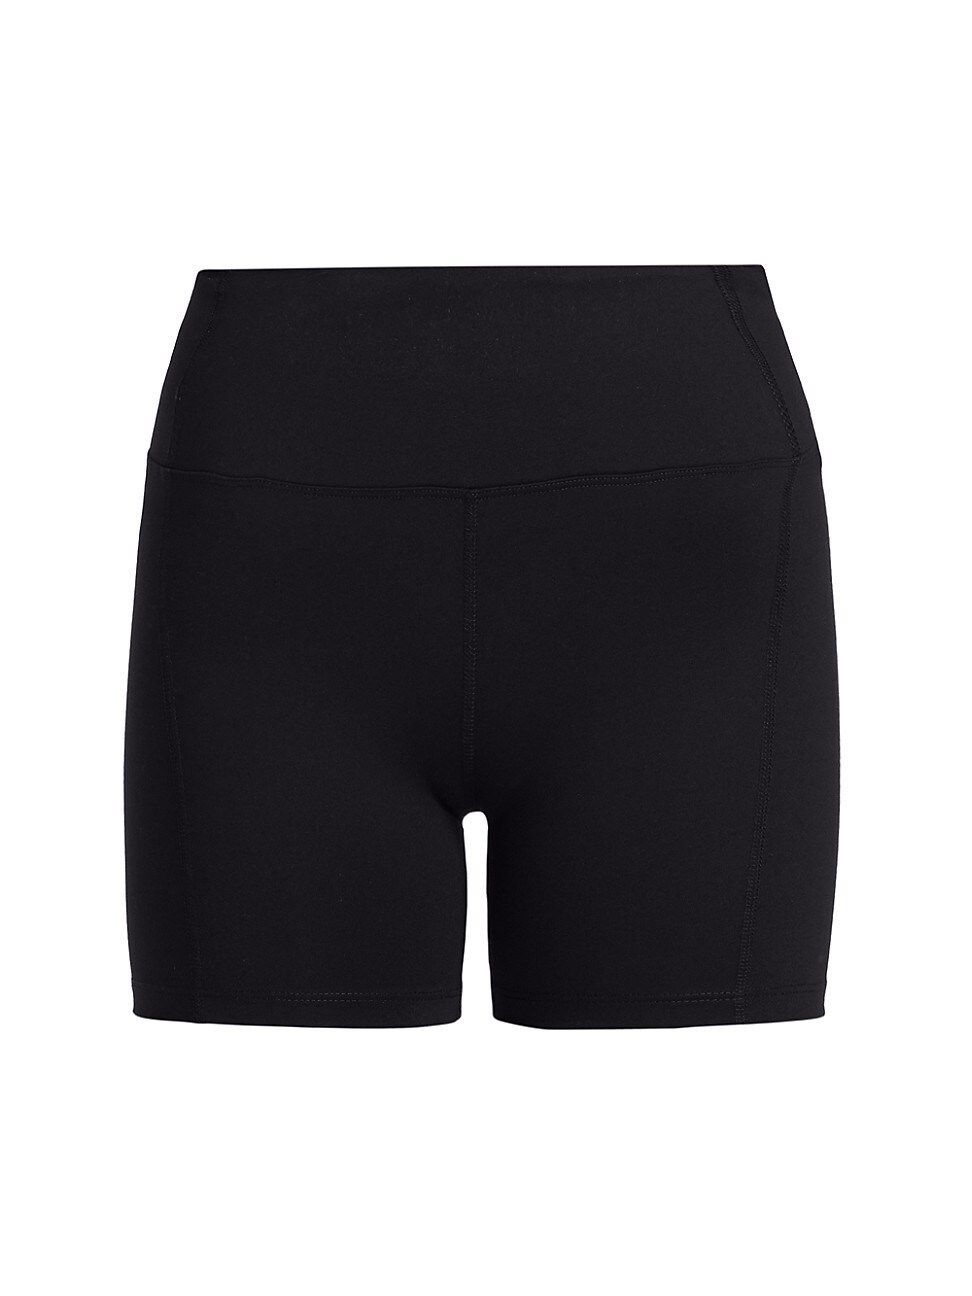 Year Of Ours Women's Bike Shorts - Black - Size XS | Saks Fifth Avenue